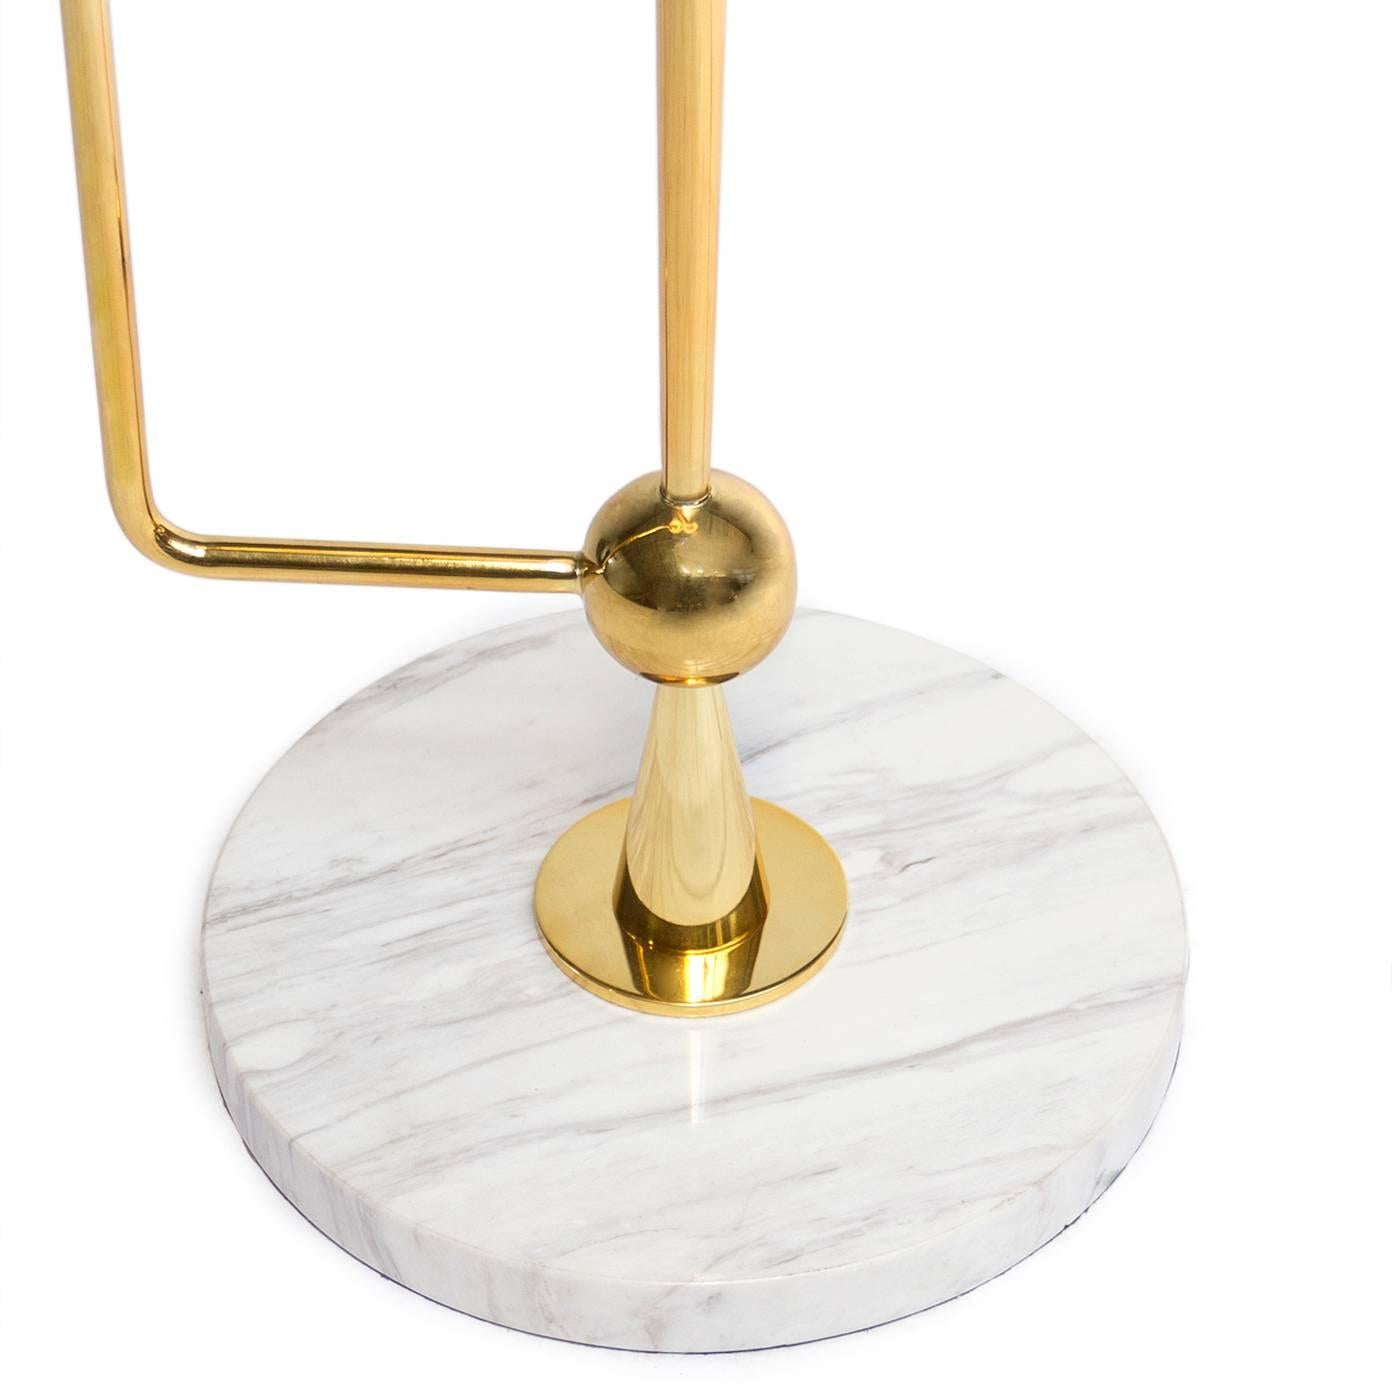 Kinetic Modernism. Sculptural and surprising with two different-sized shades. Simple geometric brass shapes—cones, spheres and rods—collide with dynamic results in the abstract stem, which is complemented by the elegant marble base and nifty pull